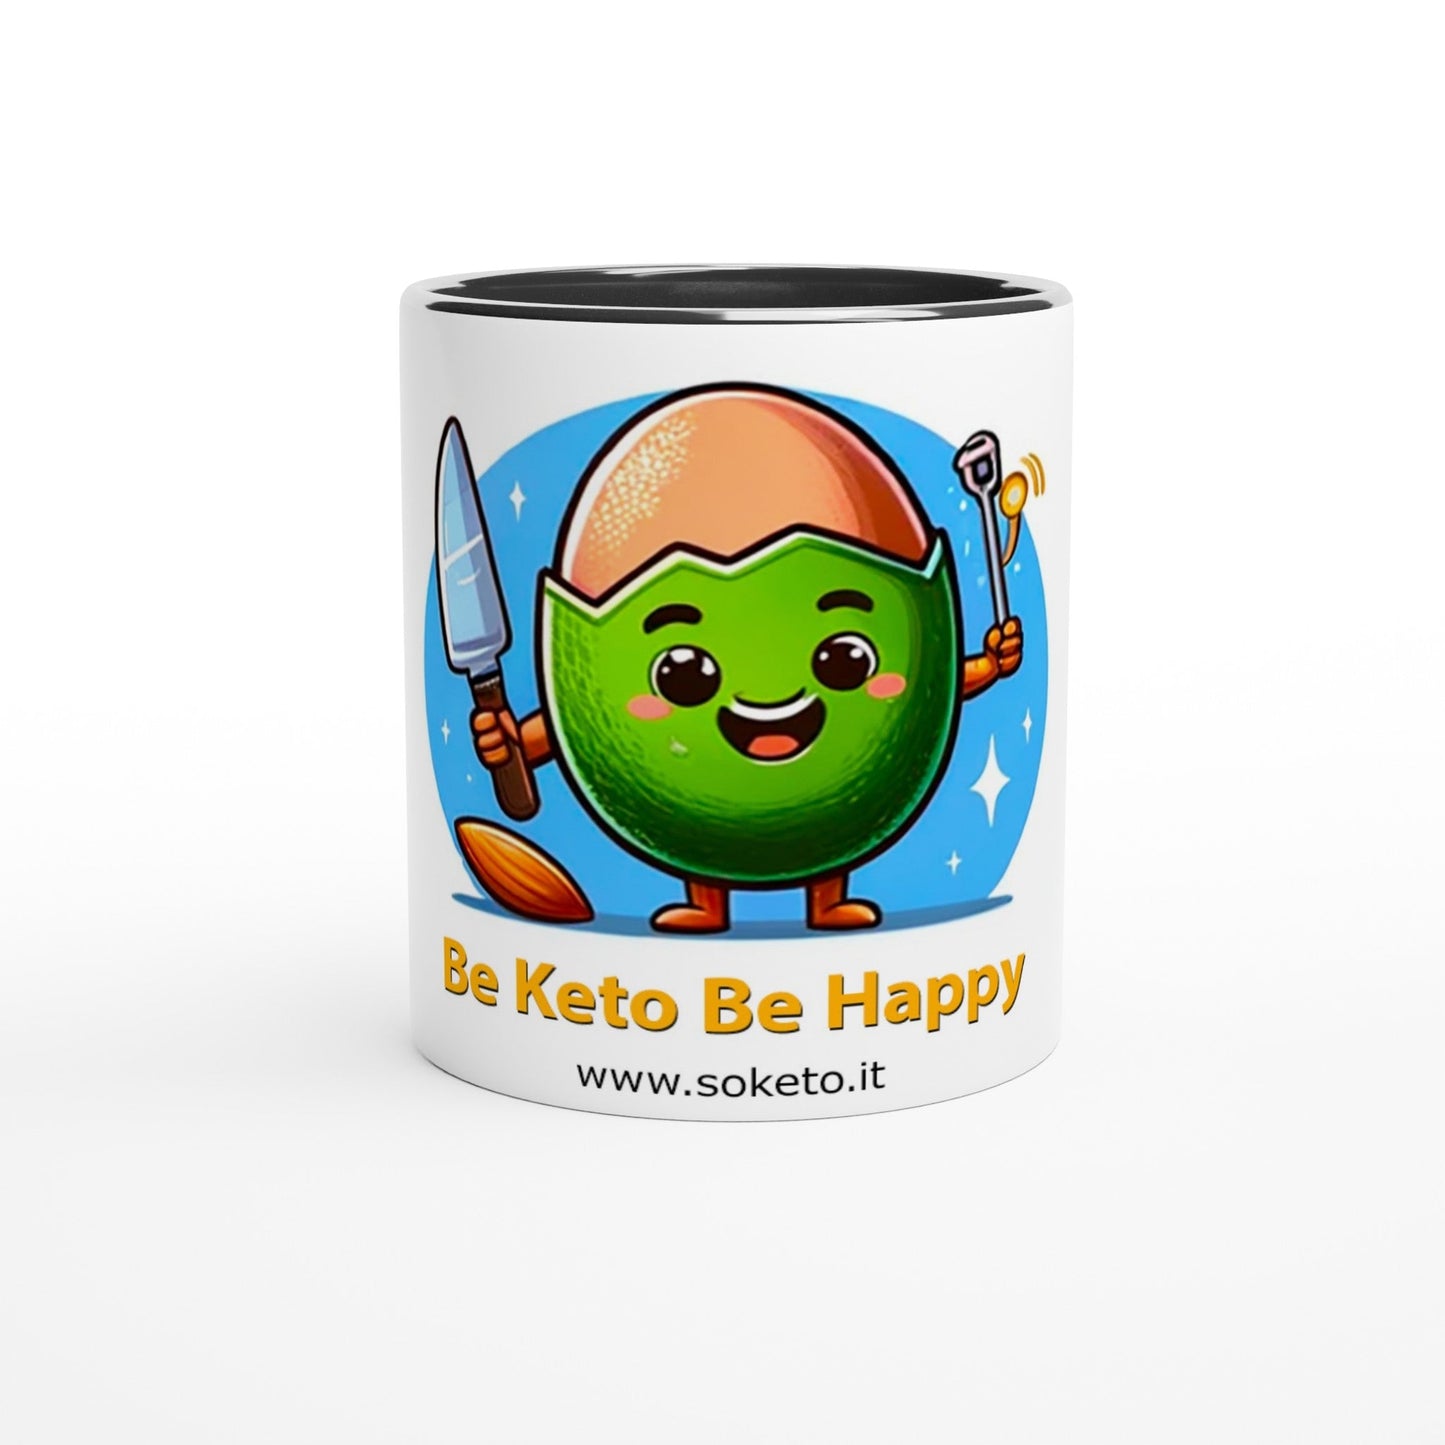 350ml "Be Keto Be Happy" Mug with Colored Interior - Start the Day with Style and Health-4